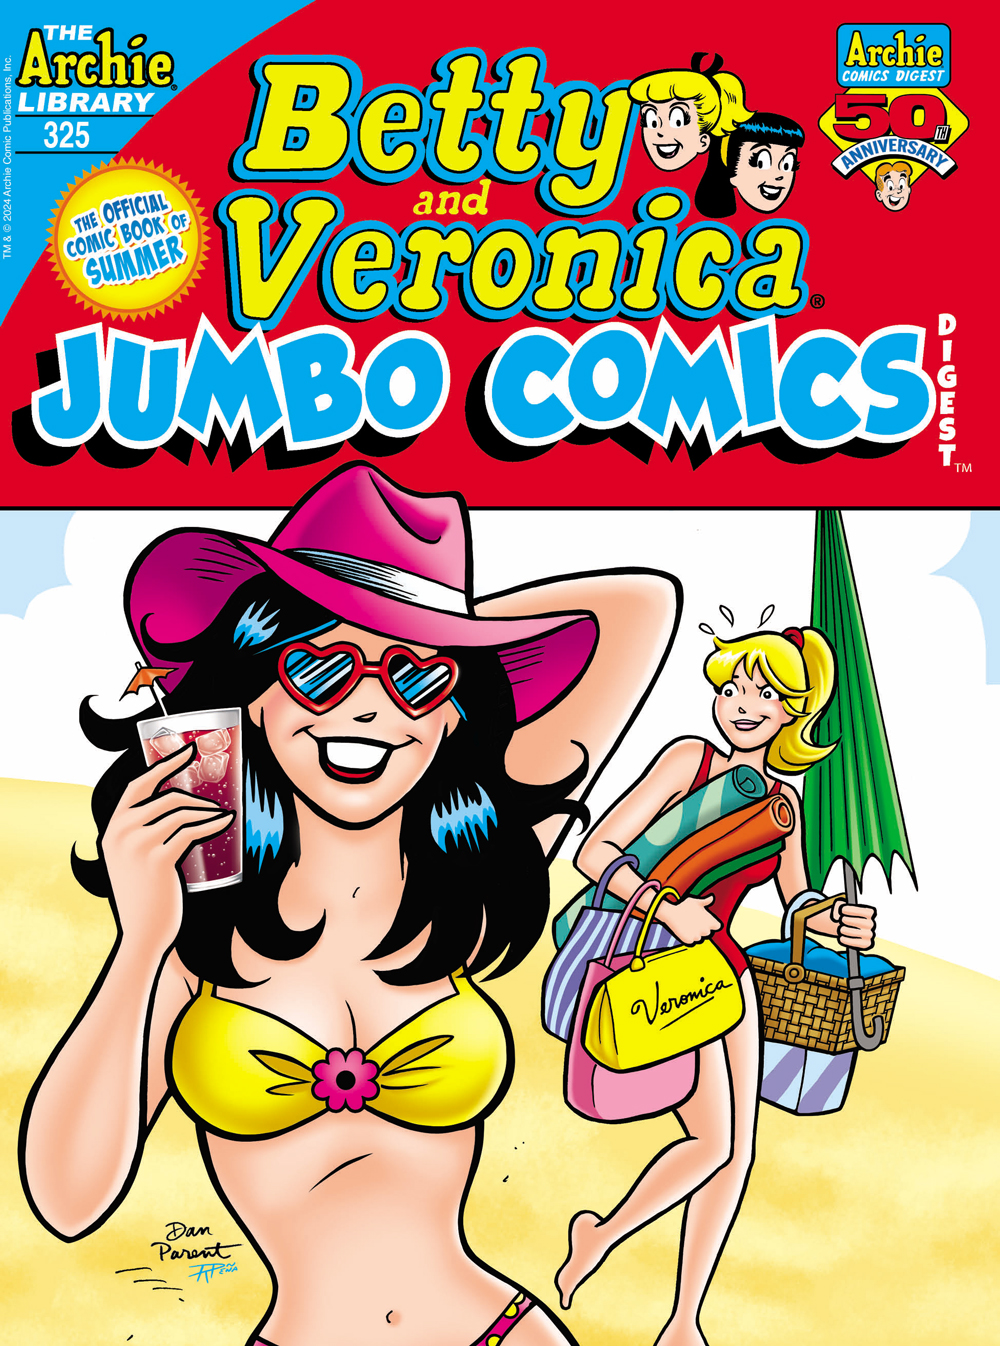 Betty and Veronica are at the beach in swimsuits. Veronica, wearing heart shaped sunglasses and a pink sun hat, smiles at the reader holding a glass of soda. Betty, in the background, smirks disapprovingly at Veronica because she is carrying all of their beach gear.